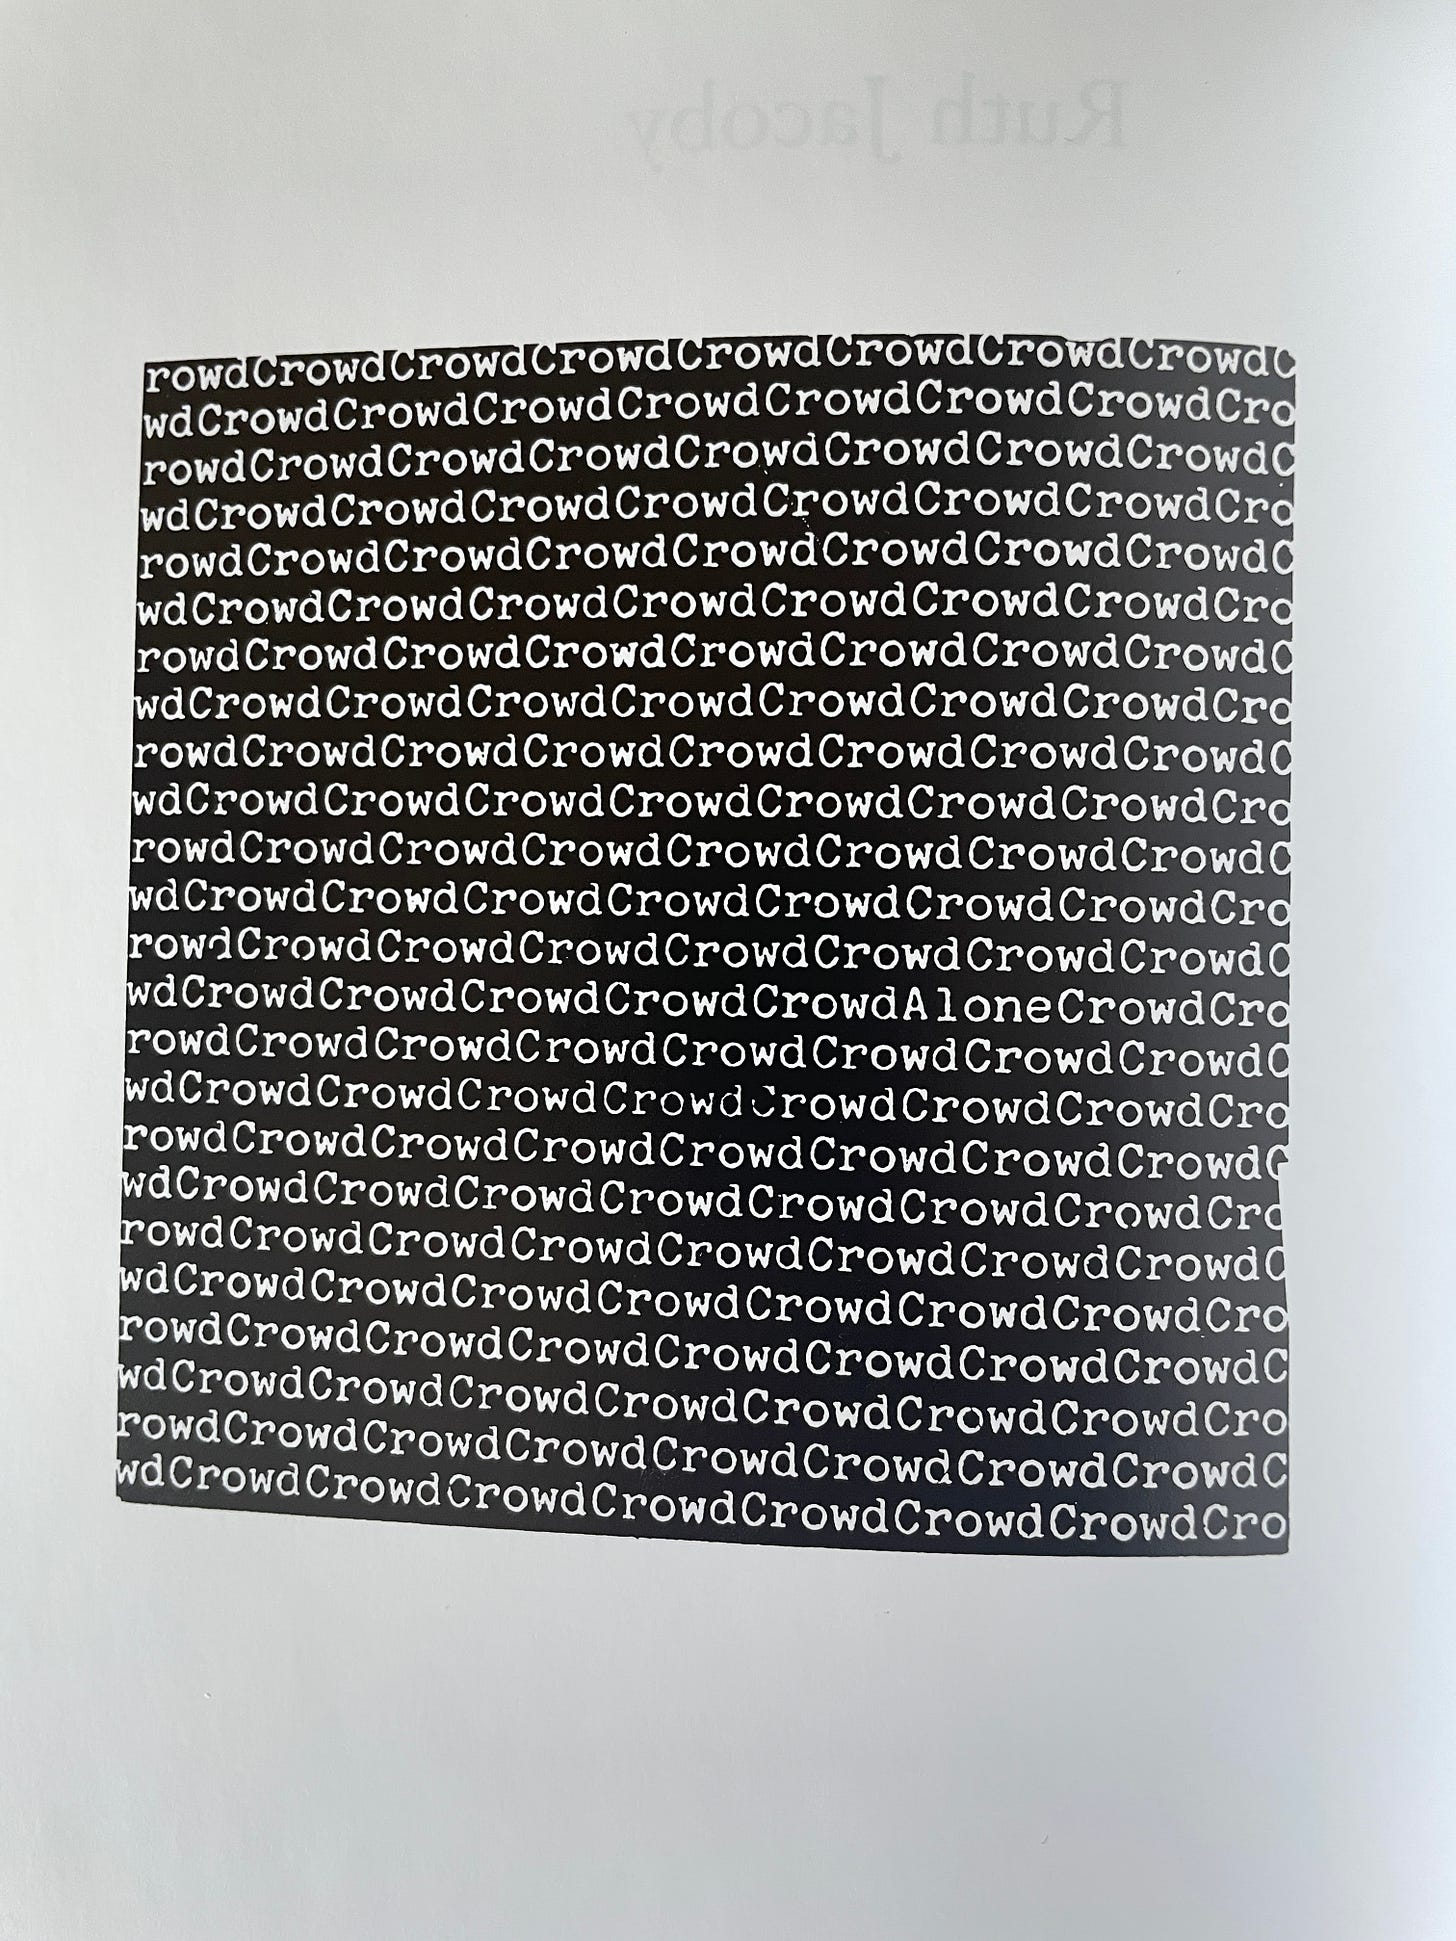 A black square with the word “Crowd” repeated in white text throughout, with a single instance of the word “Alone” hidden within it.